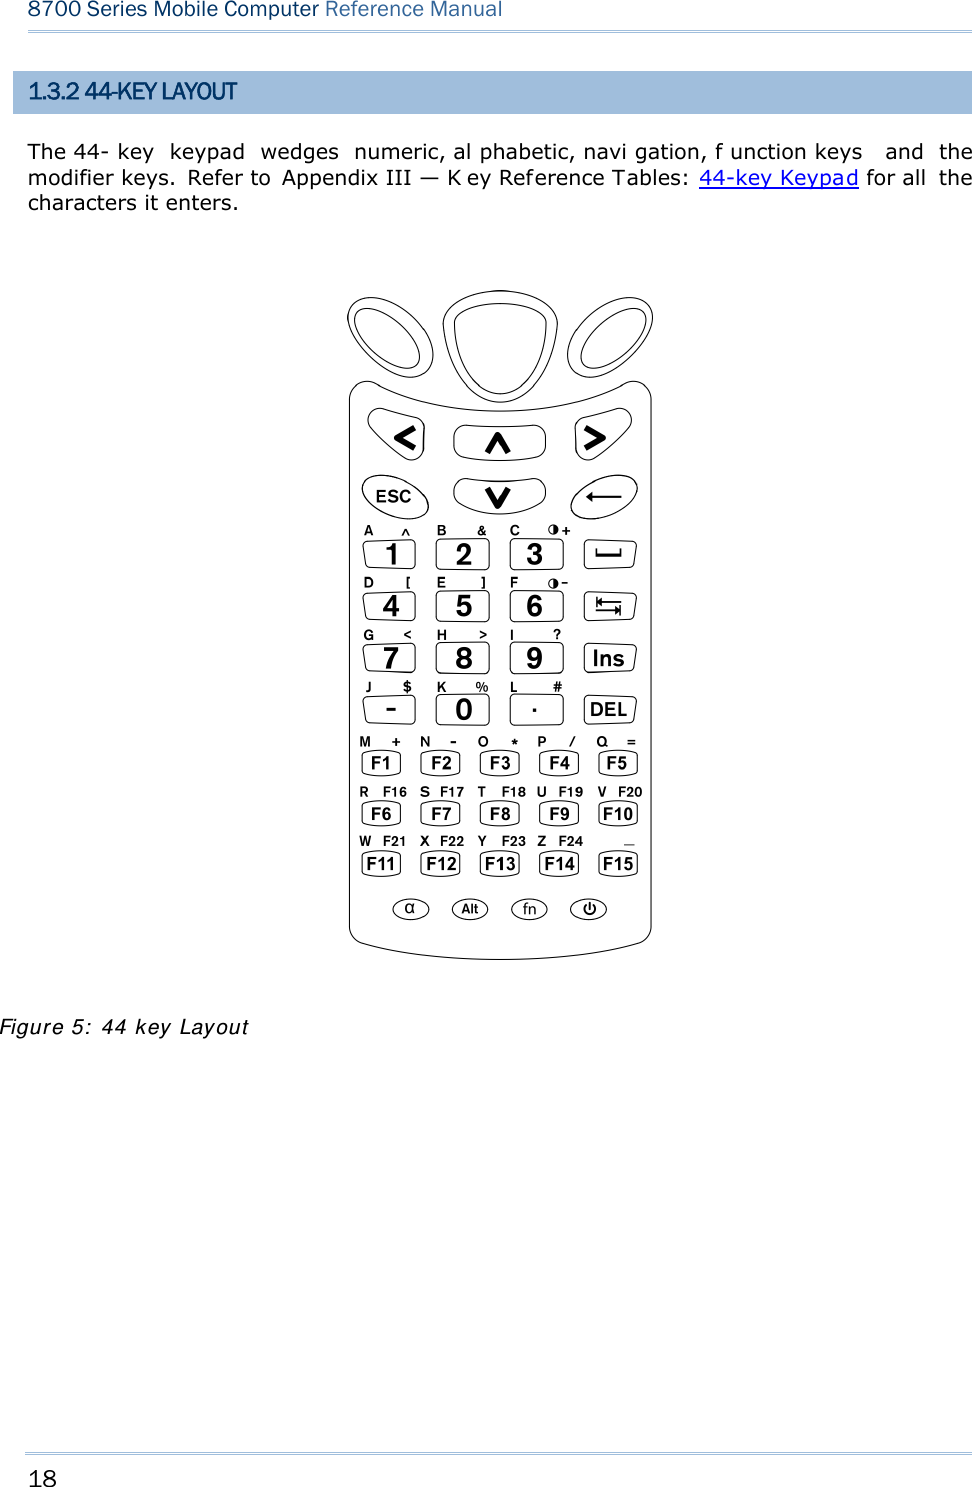 18  8700 Series Mobile Computer Reference Manual  1.3.2 44-KEY LAYOUT The 44- key keypad wedges numeric, al phabetic, navi gation, f unction keys  and the modifier keys. Refer to Appendix III — K ey Reference Tables: 44-key Keypad for all  the characters it enters.         Figure 5: 44 key Layout 